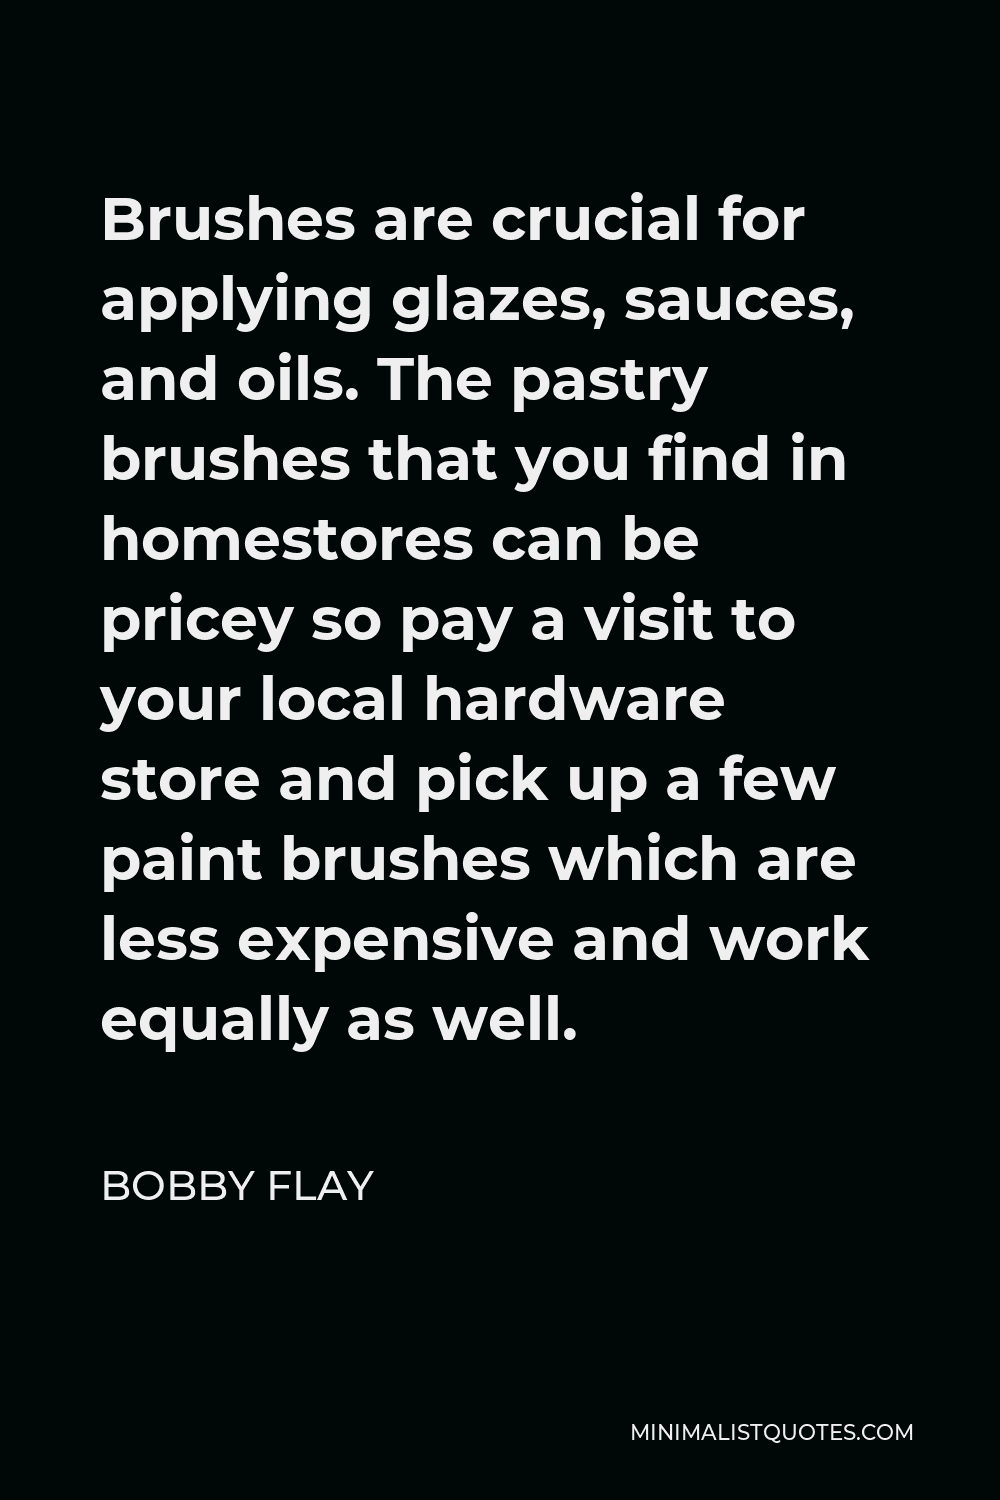 Bobby Flay Quote - Brushes are crucial for applying glazes, sauces, and oils. The pastry brushes that you find in homestores can be pricey so pay a visit to your local hardware store and pick up a few paint brushes which are less expensive and work equally as well.